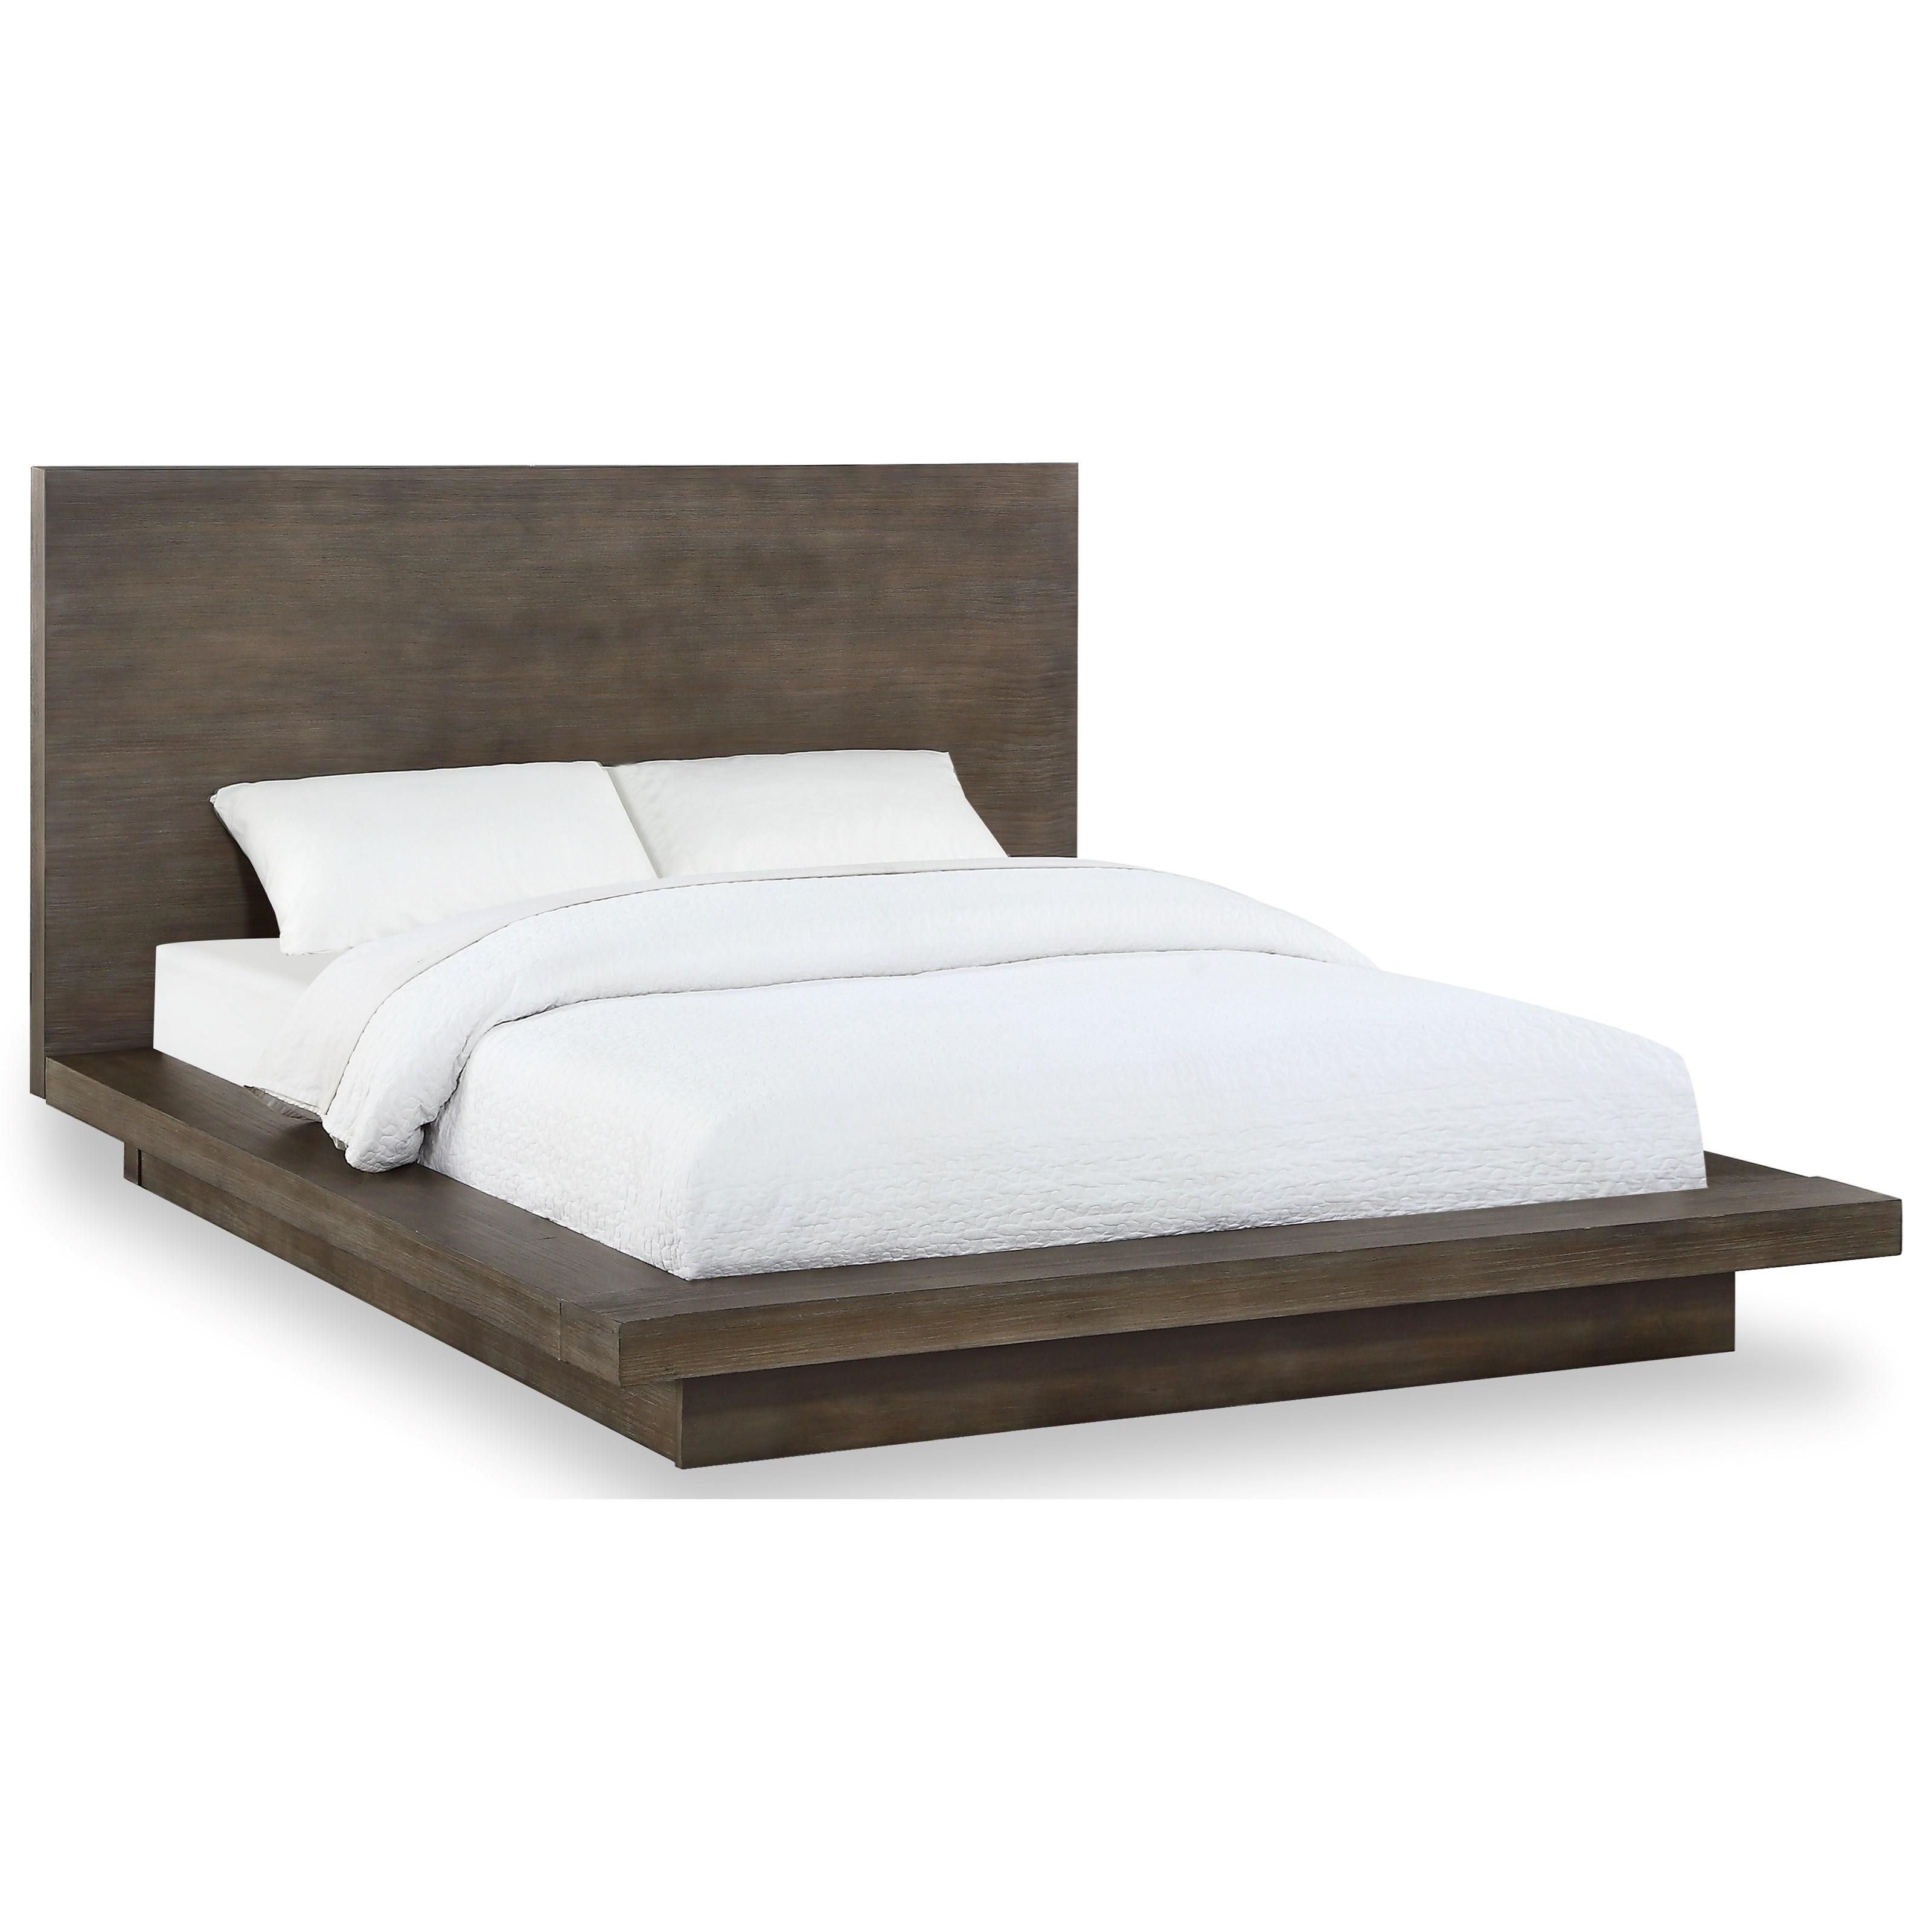 Contemporary, Rustic Platform Bed MELBOURNE 8D64H7 in Brown 